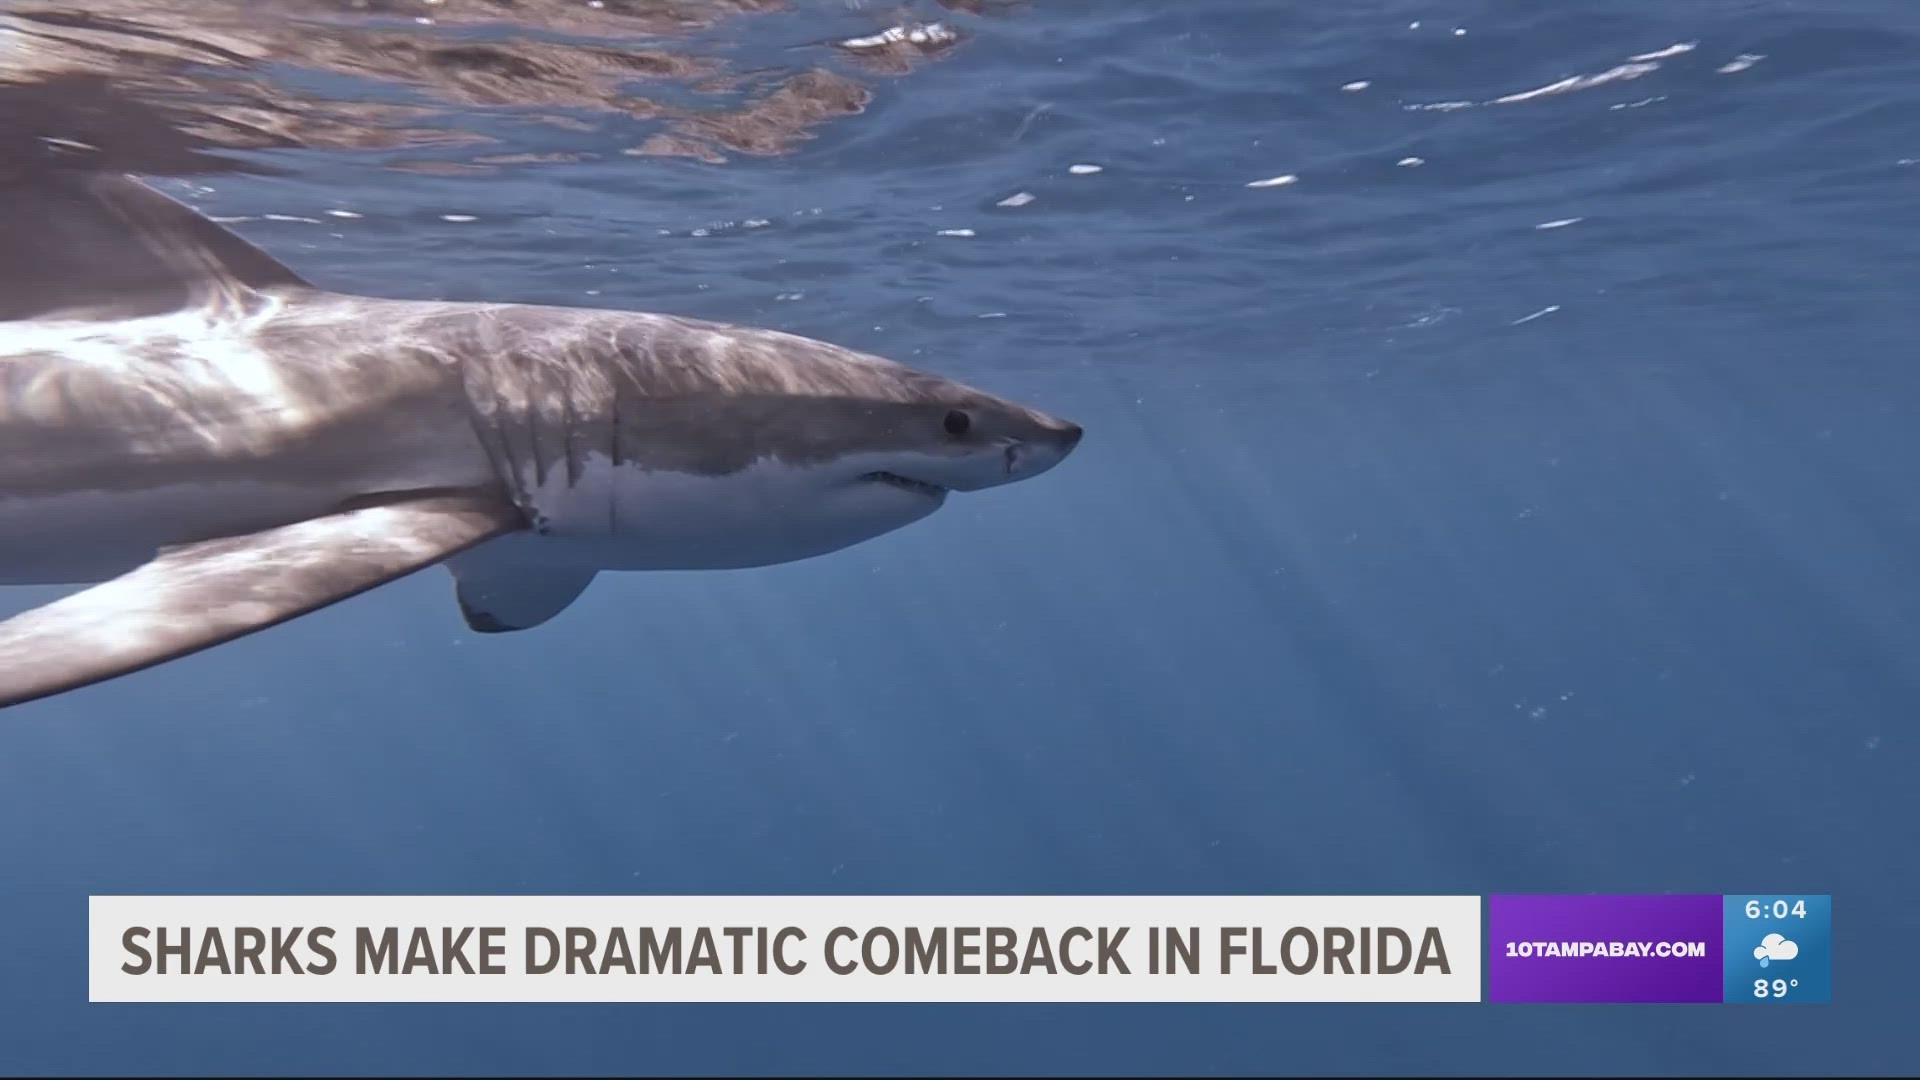 While great whites are farther out in the gulf, there are many other sharks much closer to shore.